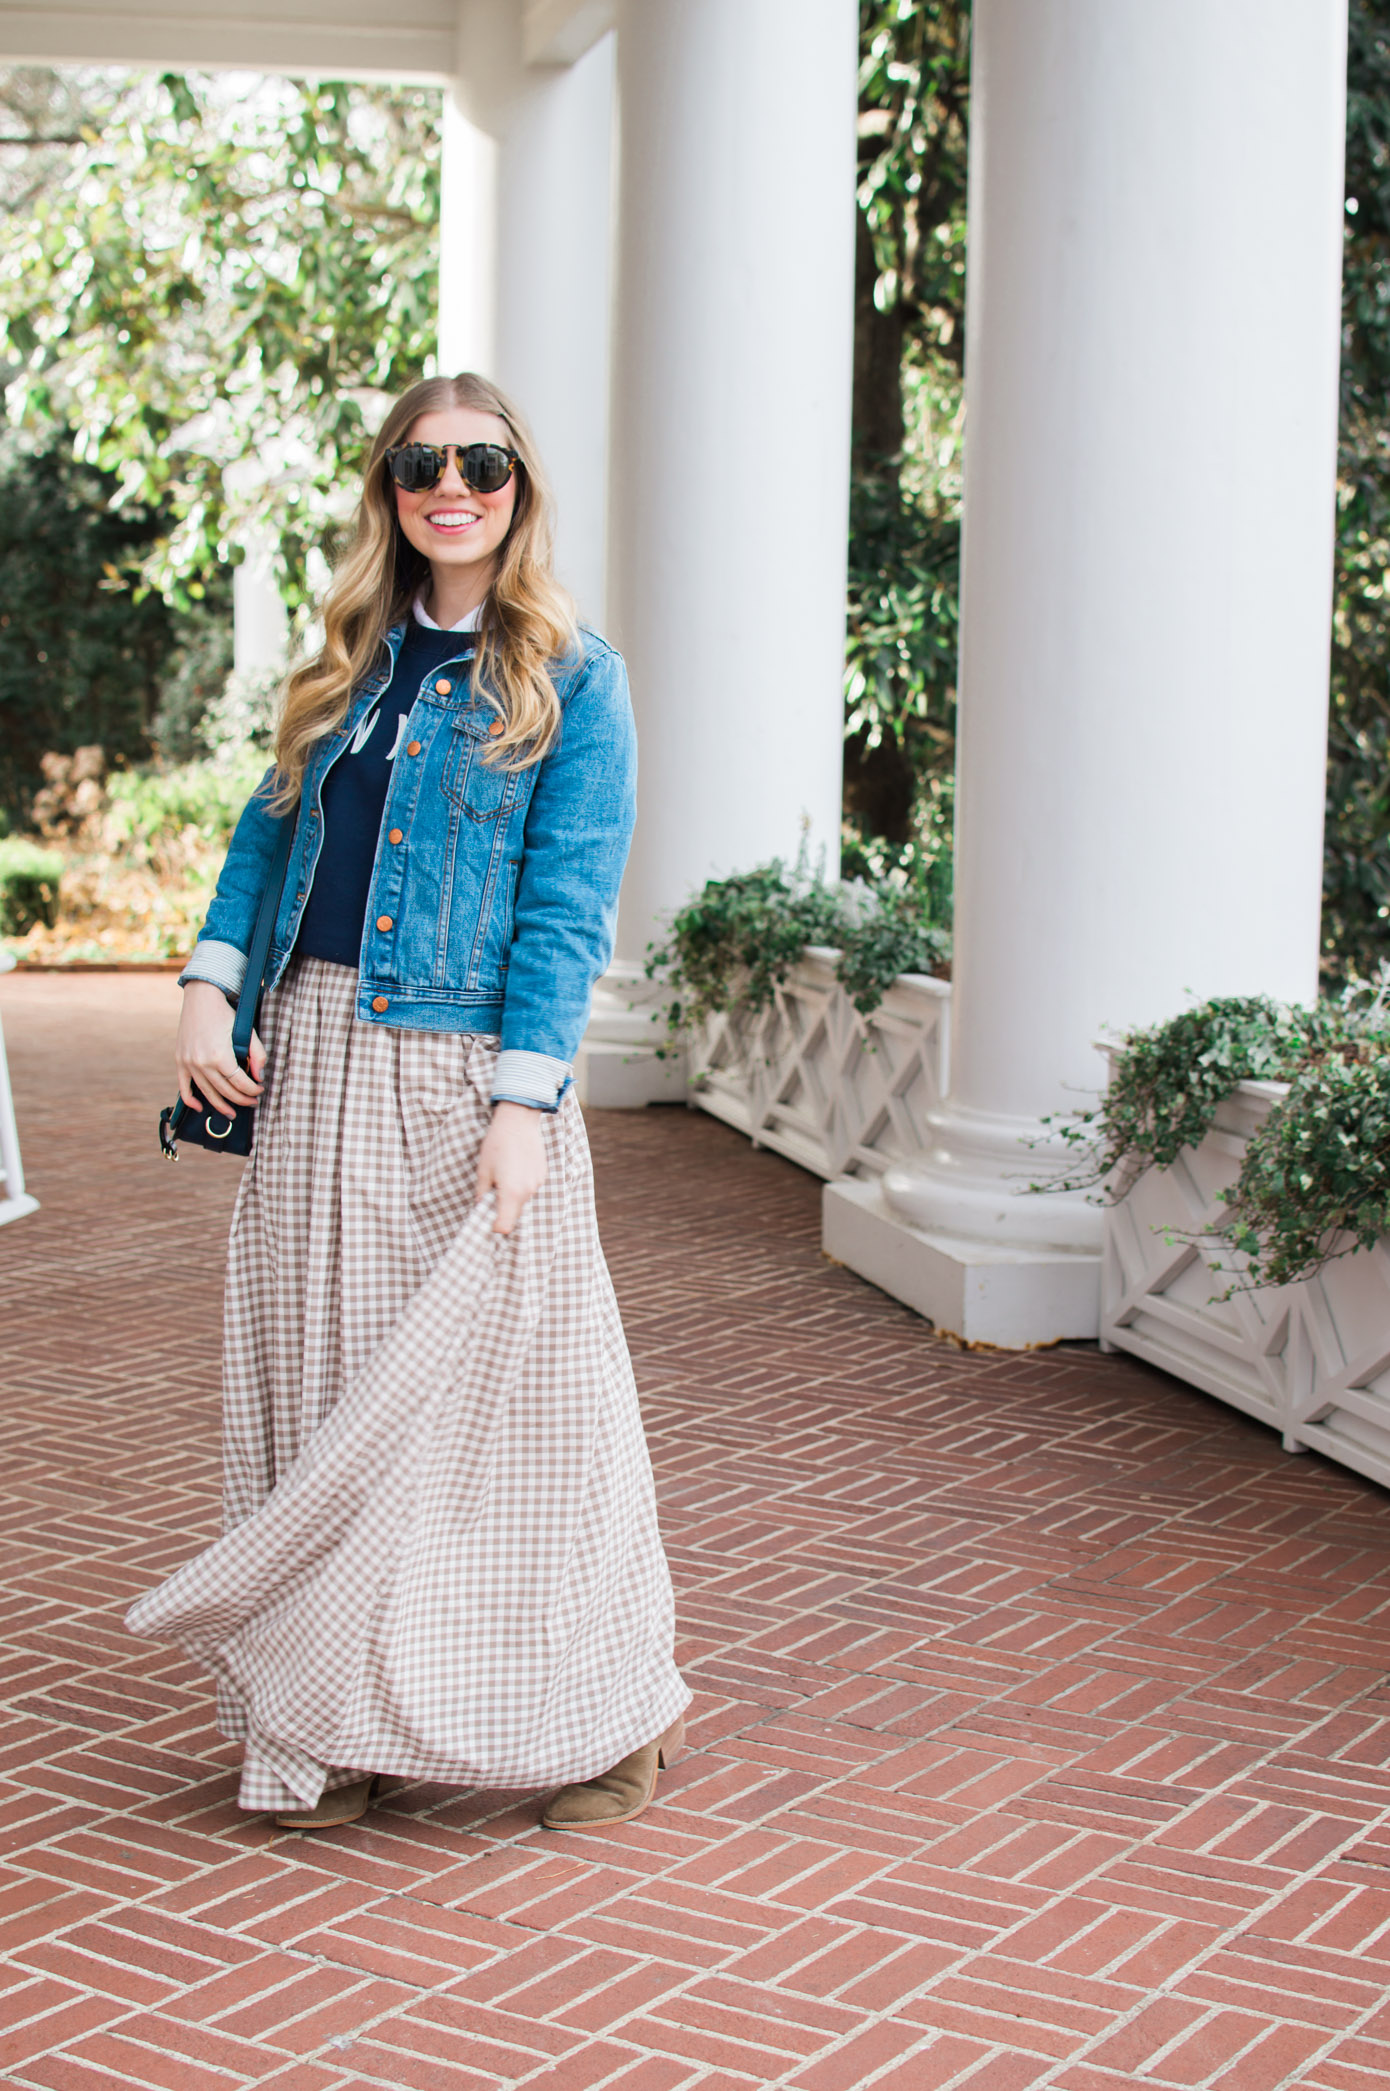 How to Rock the Denim Maxi Skirt Trend - PureWow